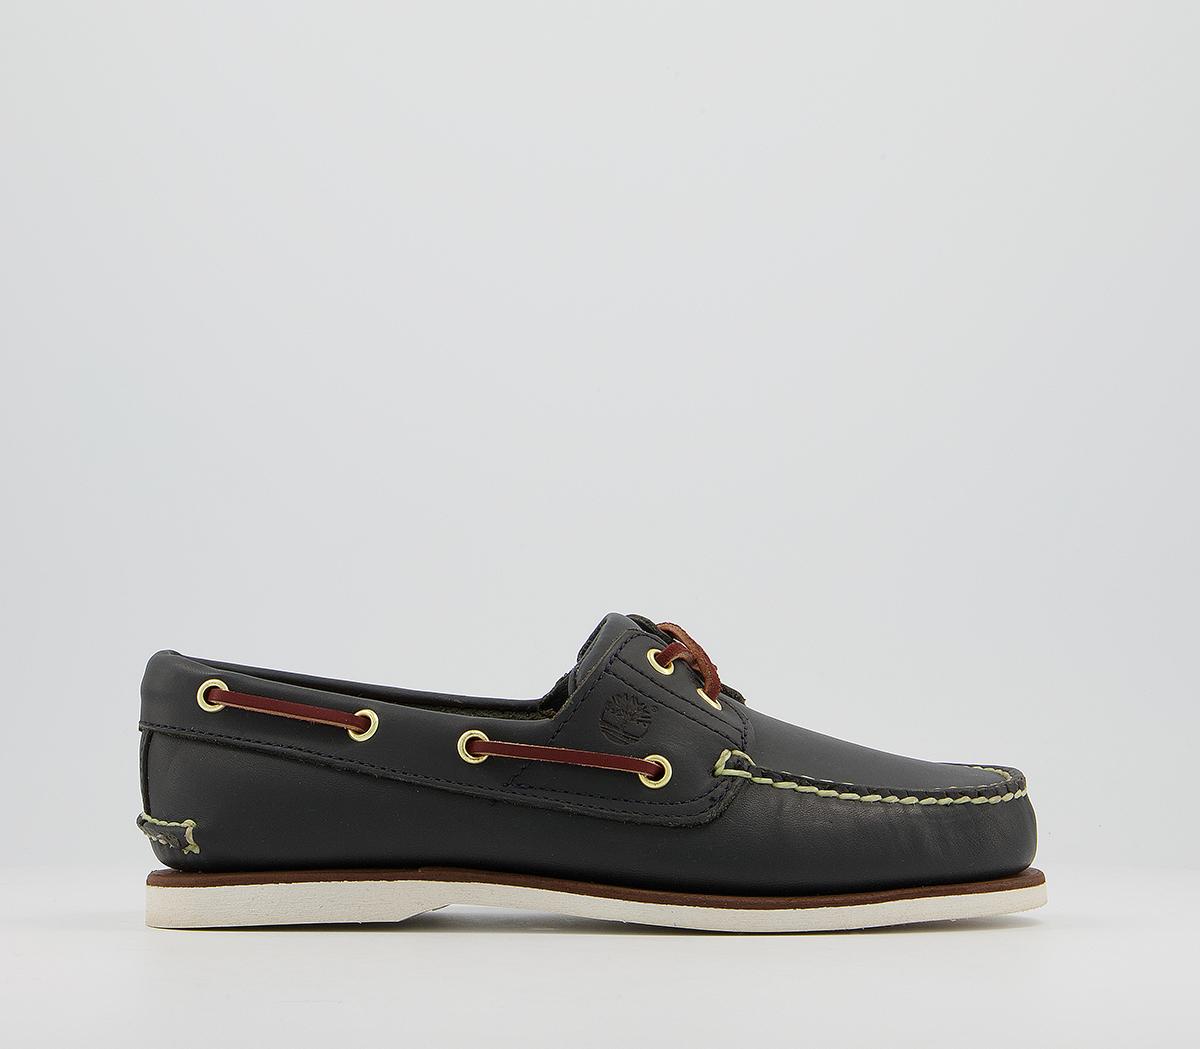 TimberlandNew Boat ShoesNavy Leather